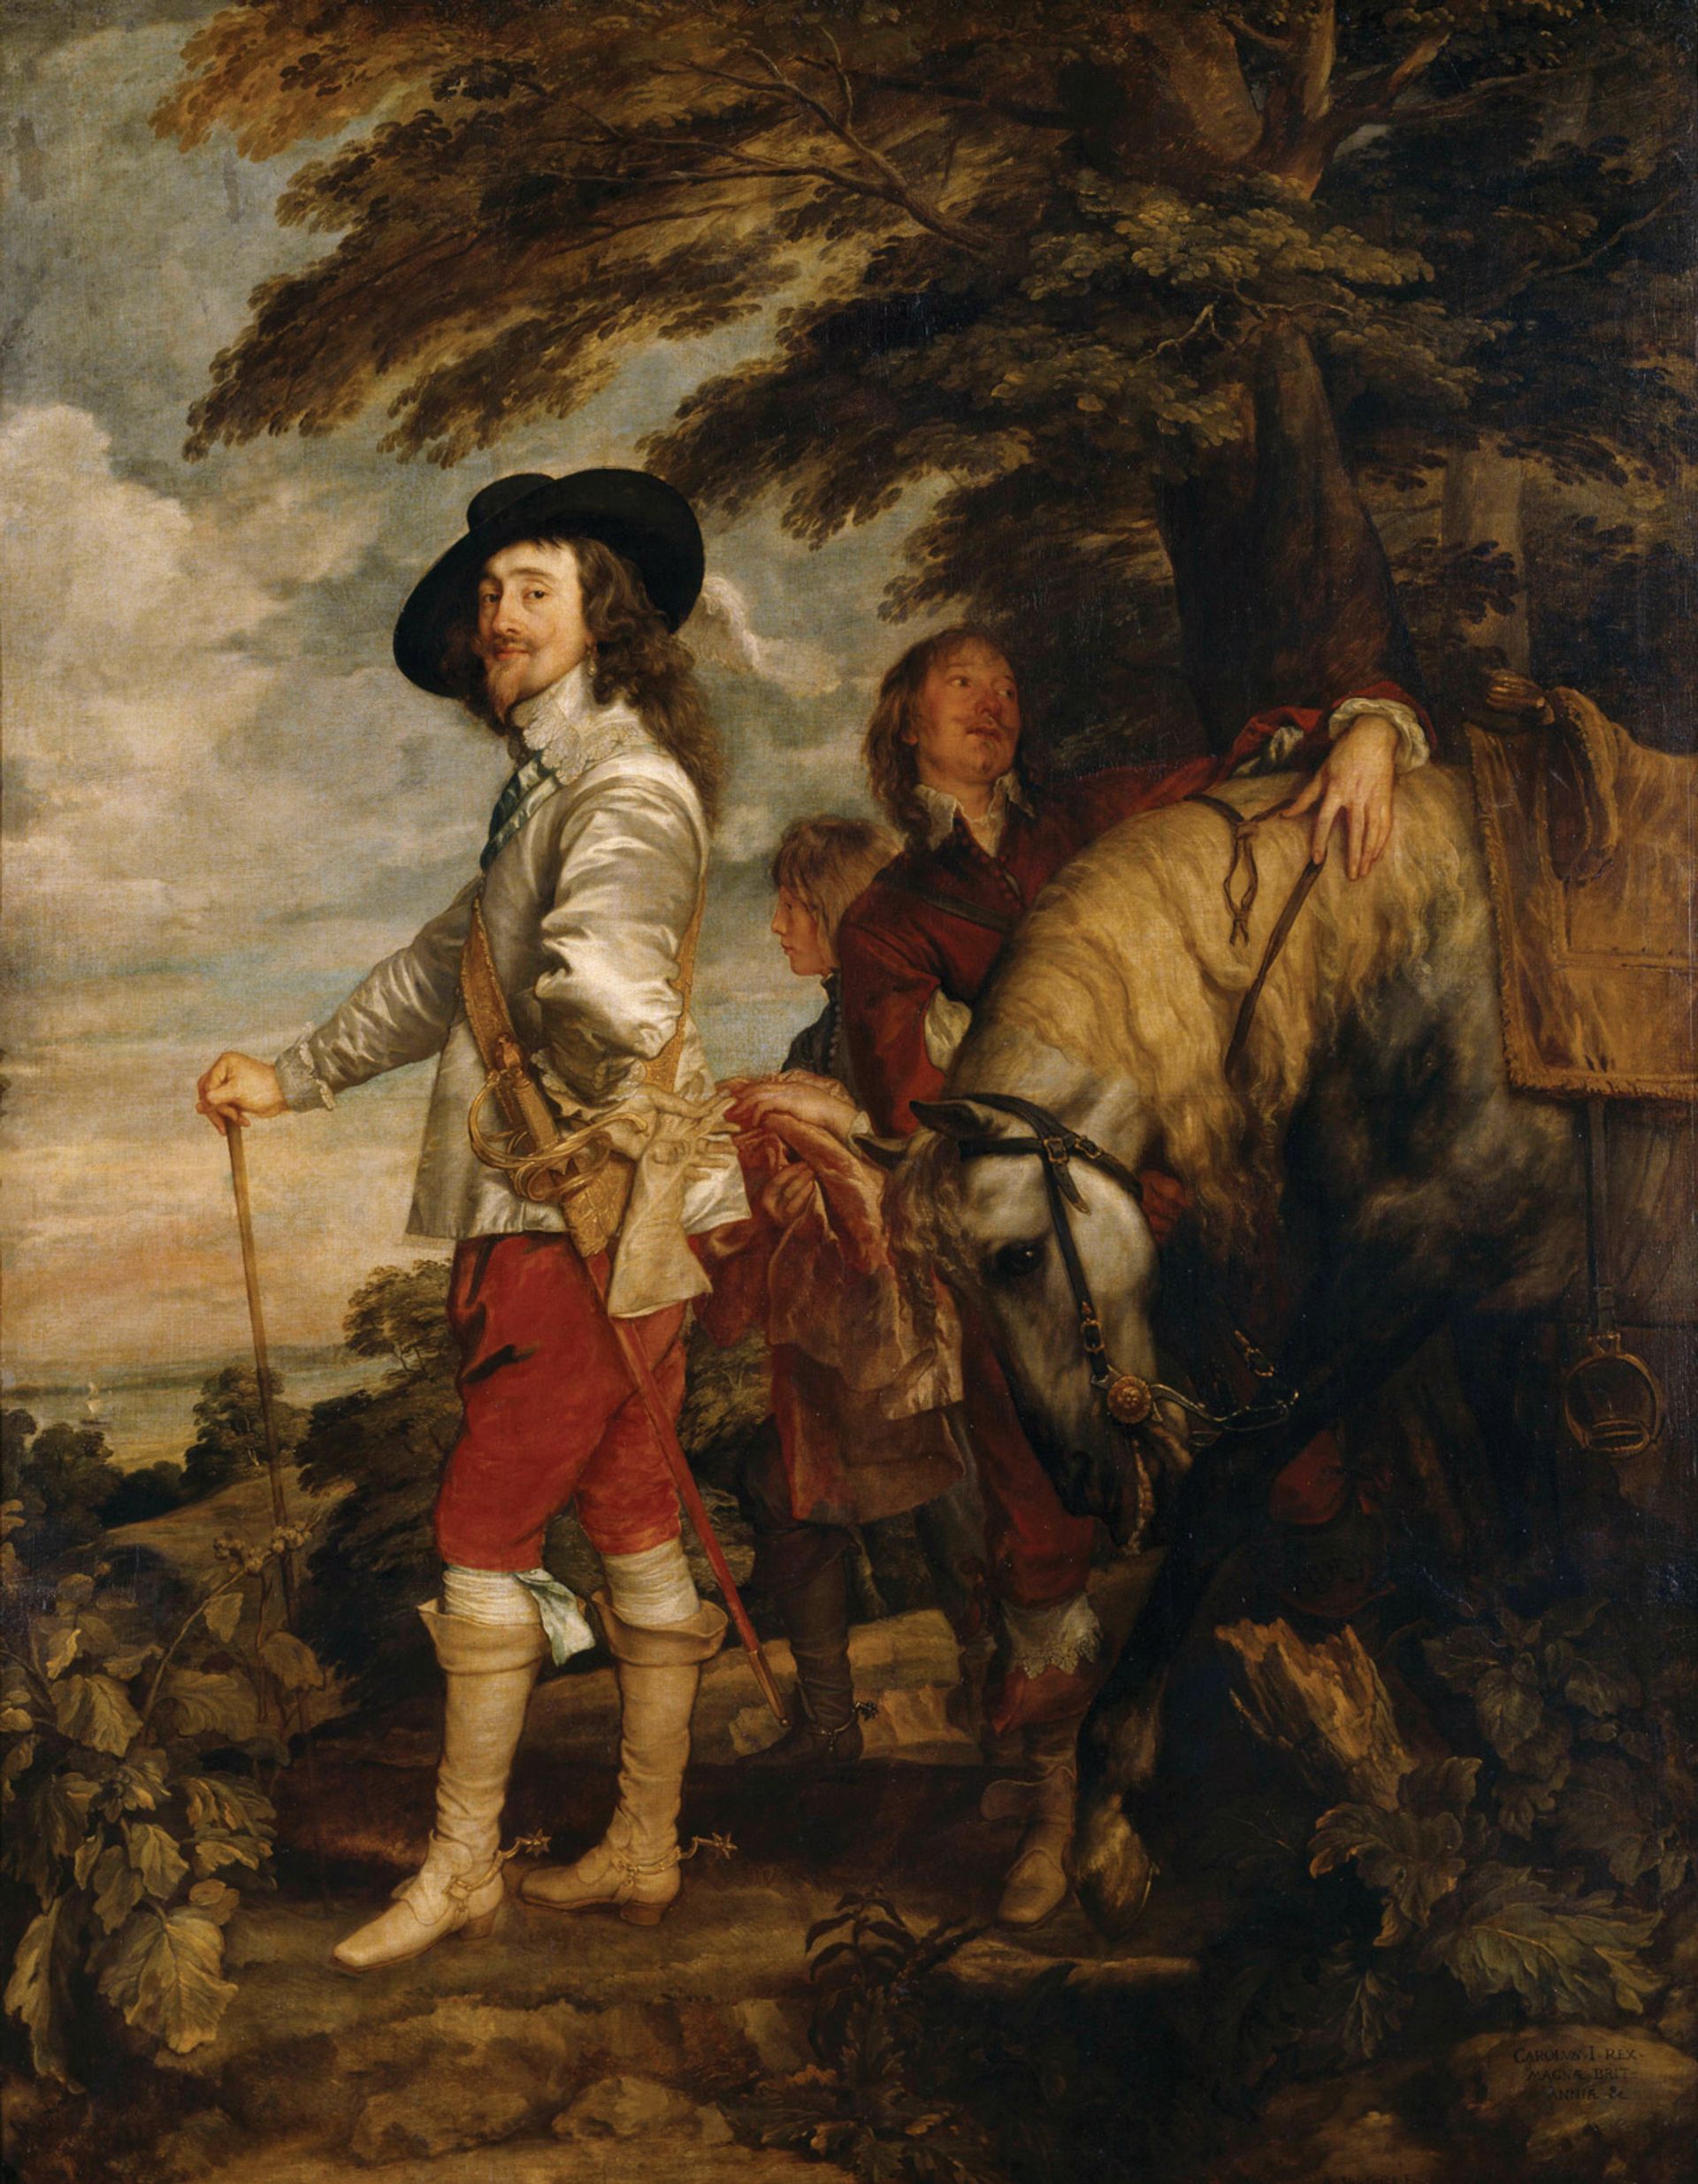 Anthony van Dyck’s Charles I in the Hunting Field or “Le Roi à la Chasse” (around 1636) RMN-Grand Palais; Musée du Louvre; Christian Jean